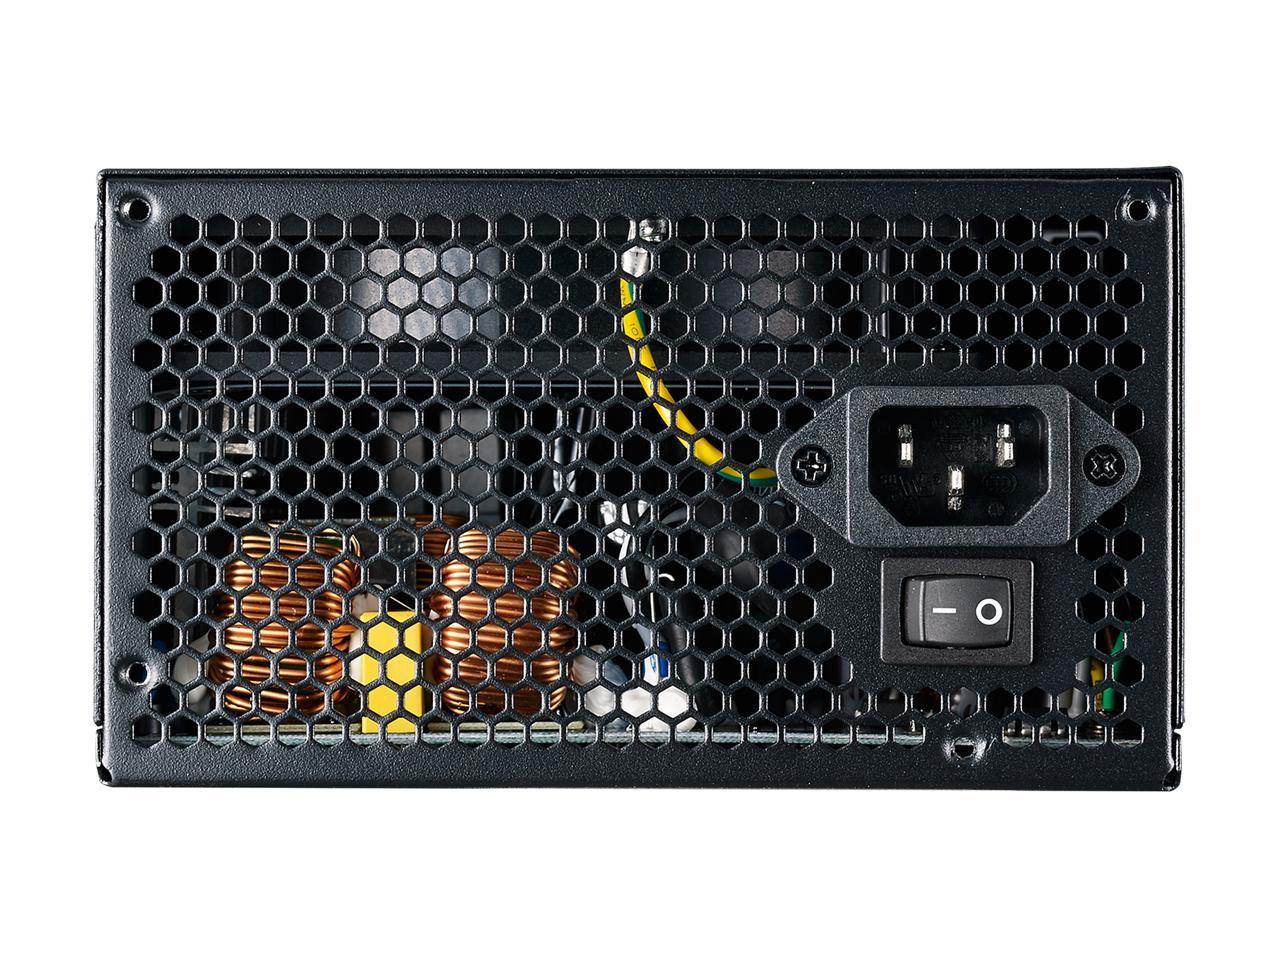 Cooler Master Mpe-6501-Afaag-Us 80 Plus Gold 650W V2 Full Modular Atx 12V Power Supply W/ Active Pfc